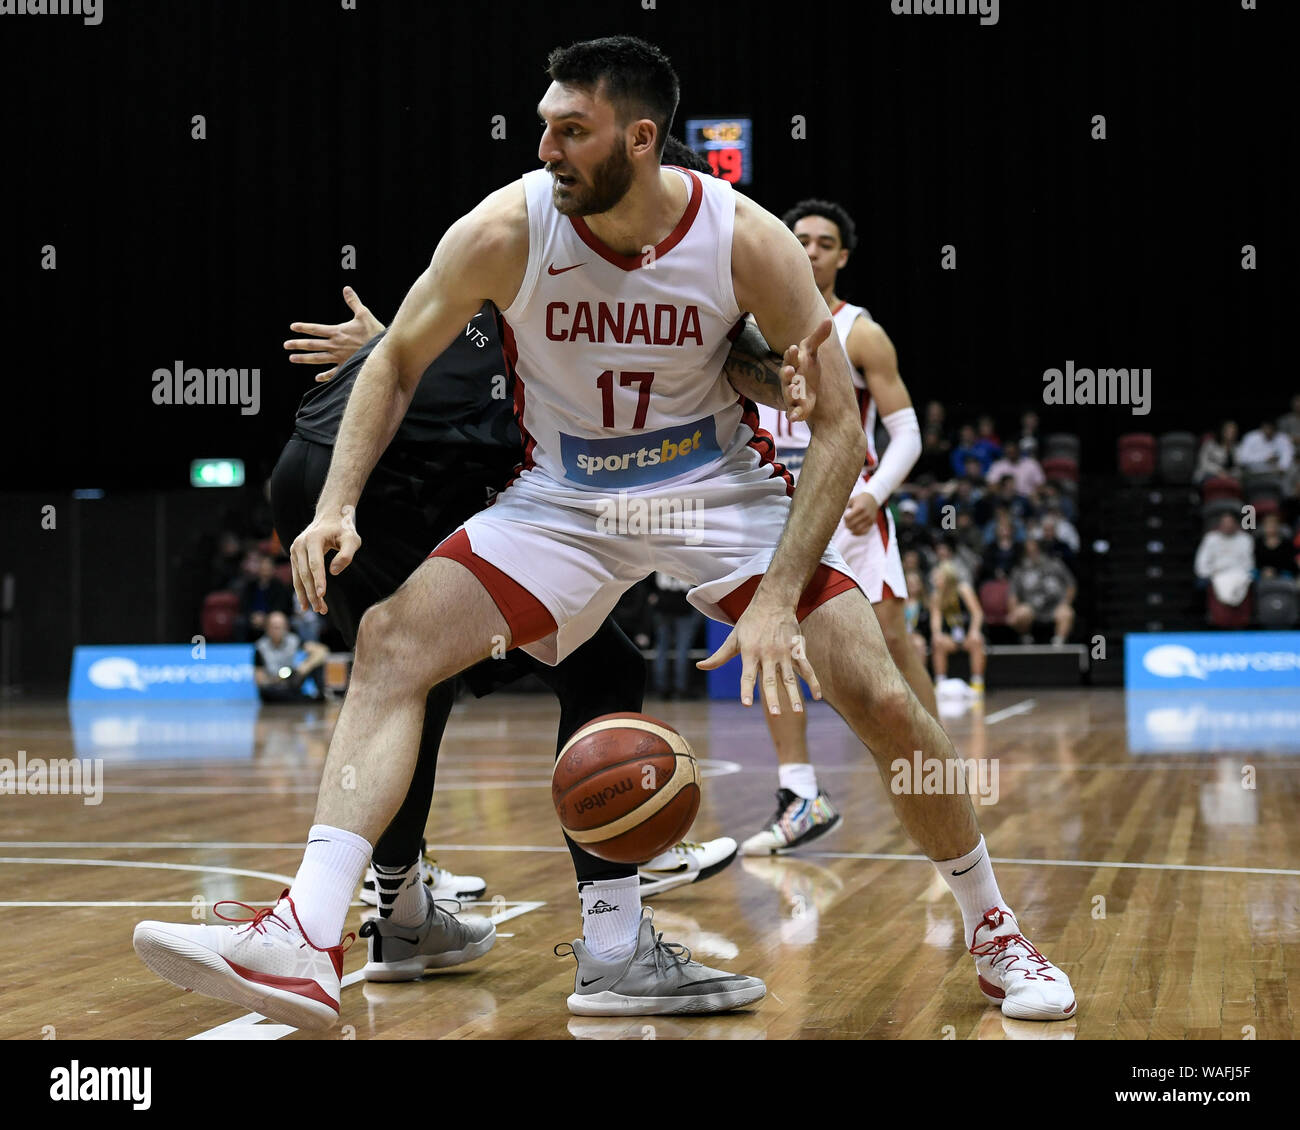 20th August 2019; Quay Centre, Sydney,  Australia; International Basketball, Canada versus New Zealand Tall Blacks; Owen Klassen of Canada under pressure from the Tall Blacks defence - Editorial Use Only. Stock Photo